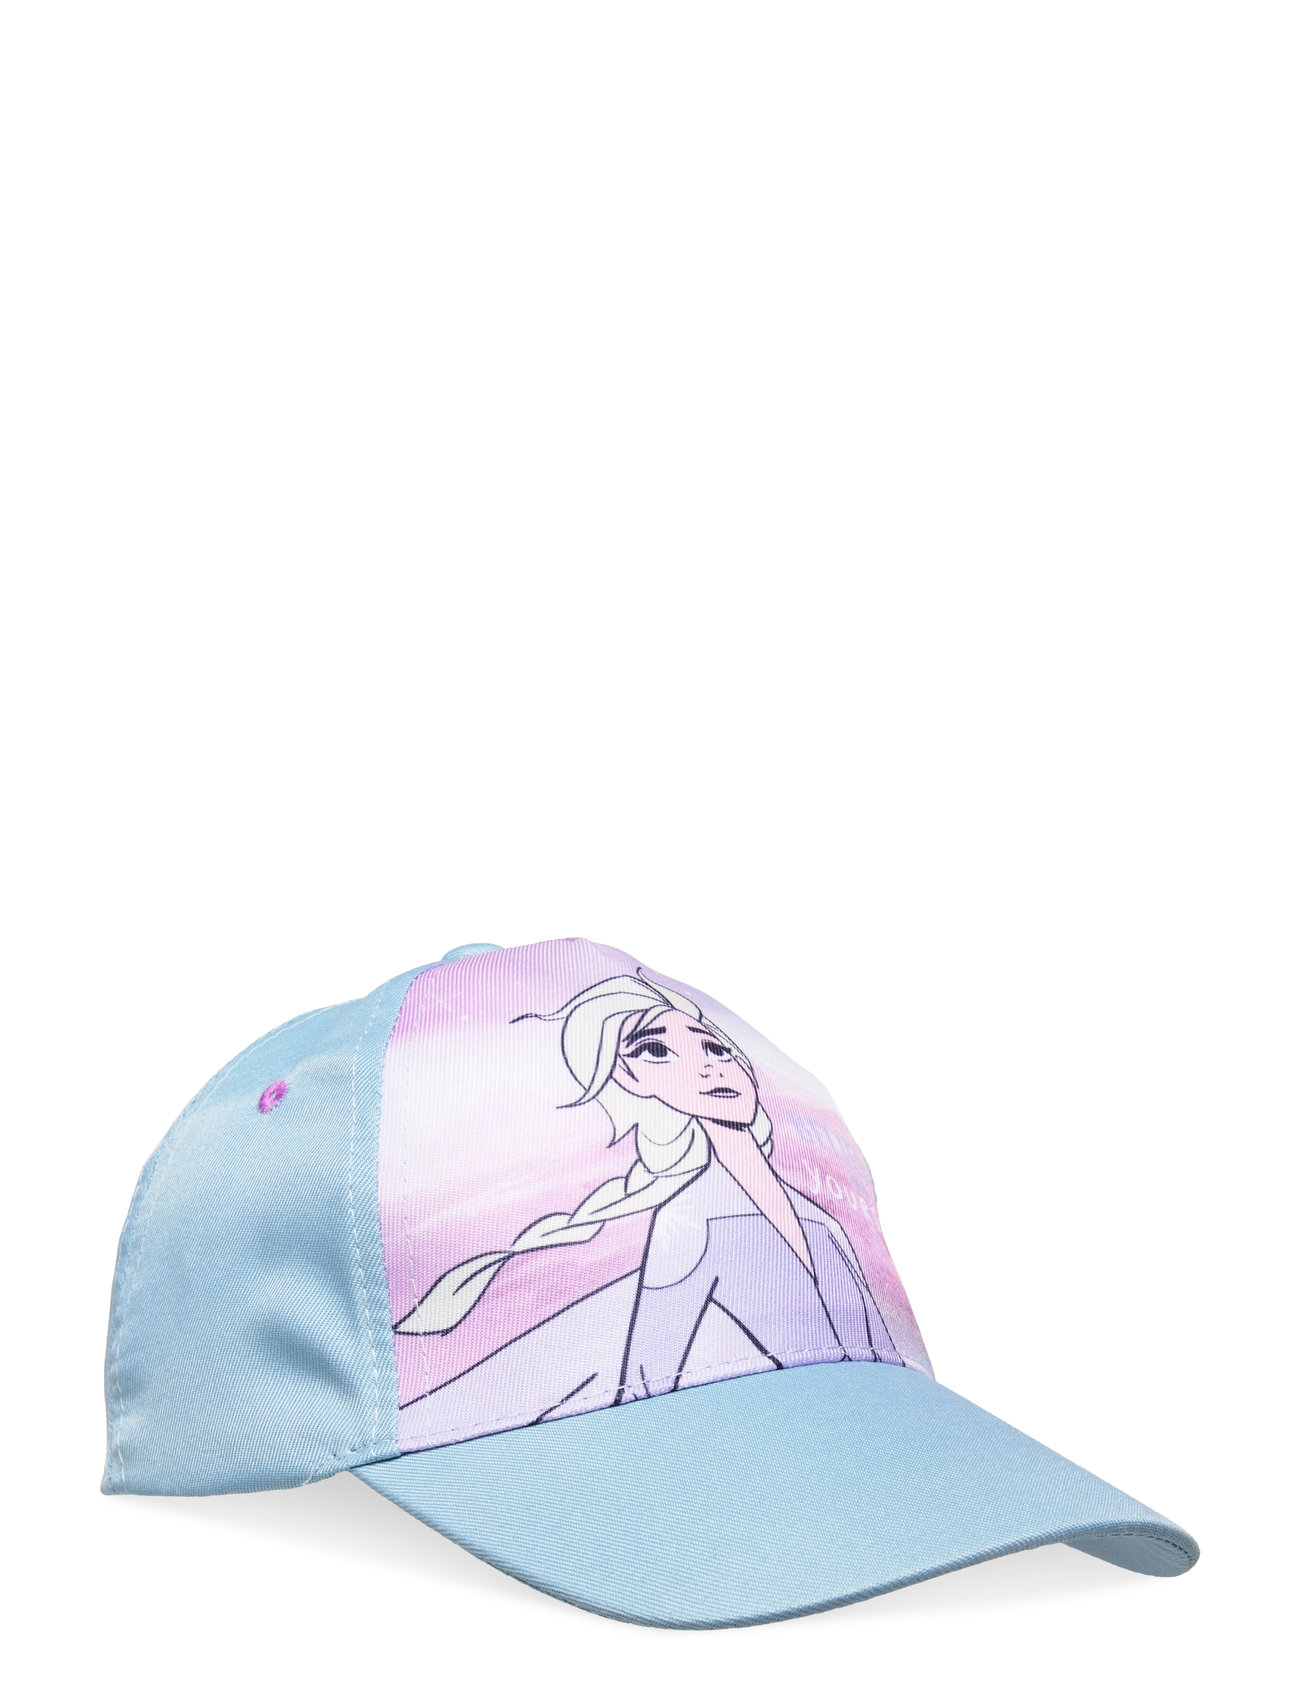 Cap In Sublimation Accessories Headwear Caps Blue Frost